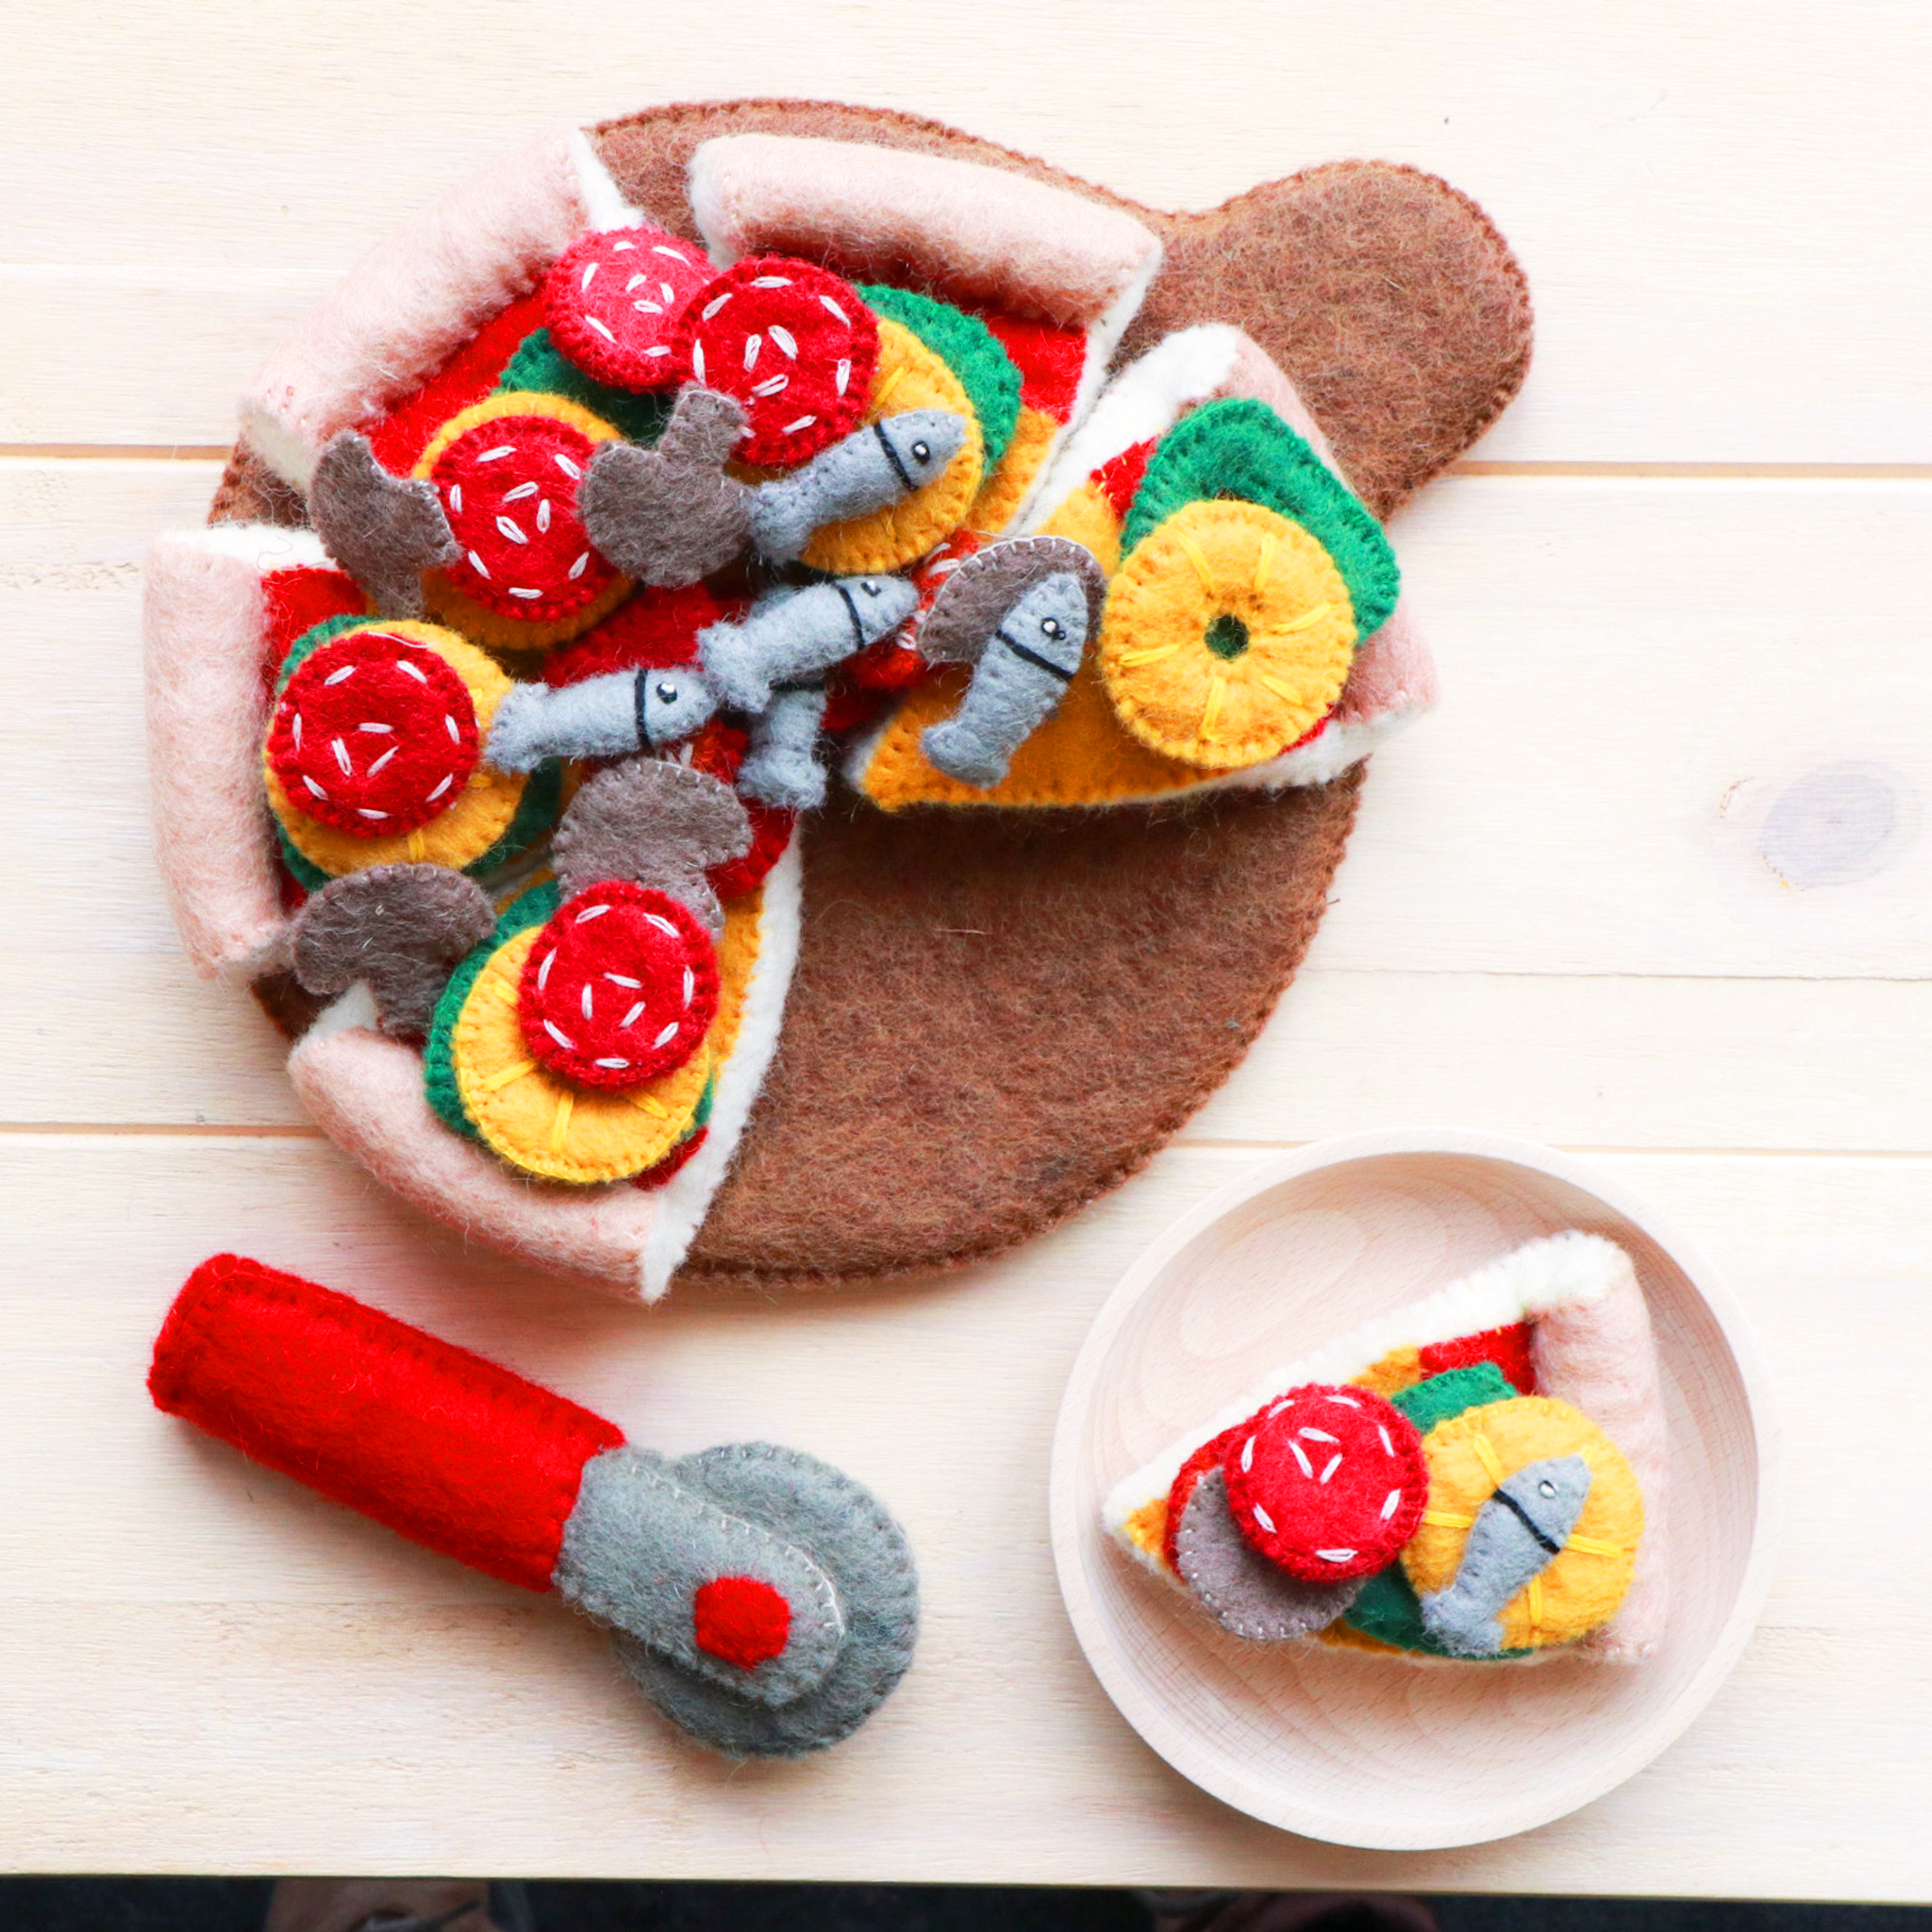 Food - Pizza With Cutter Set